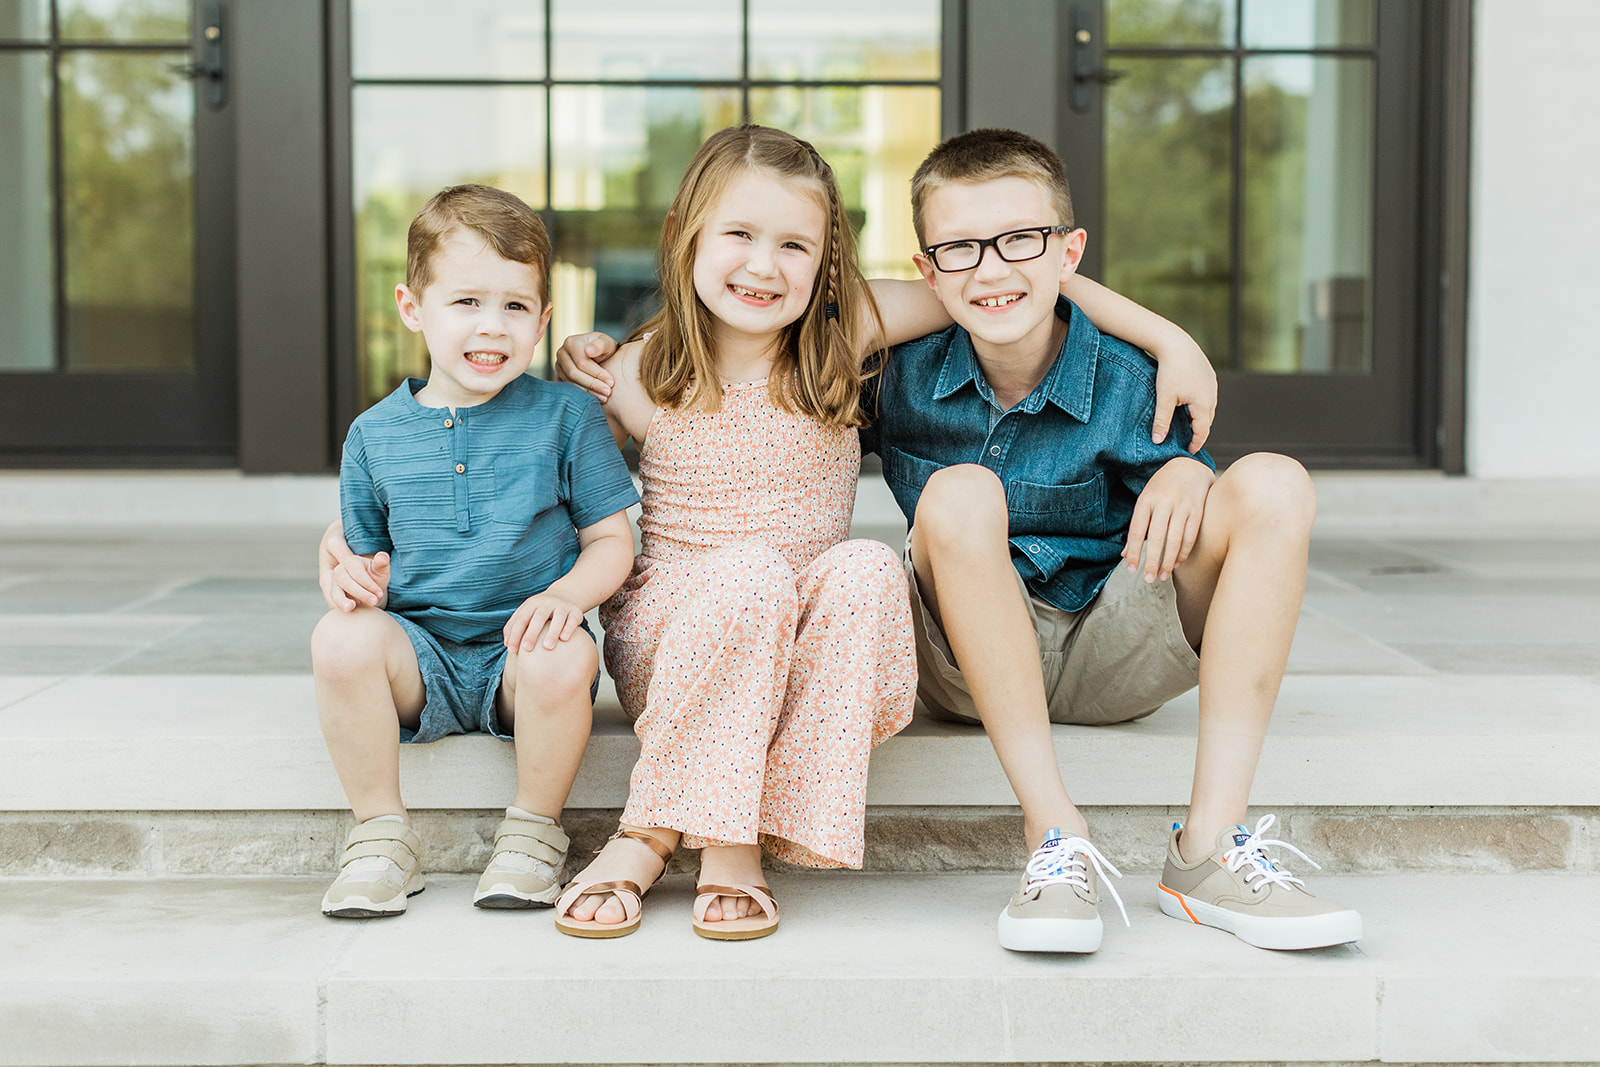 outdoor in-home family session in nashville tennessee. three siblings, two boys one girl